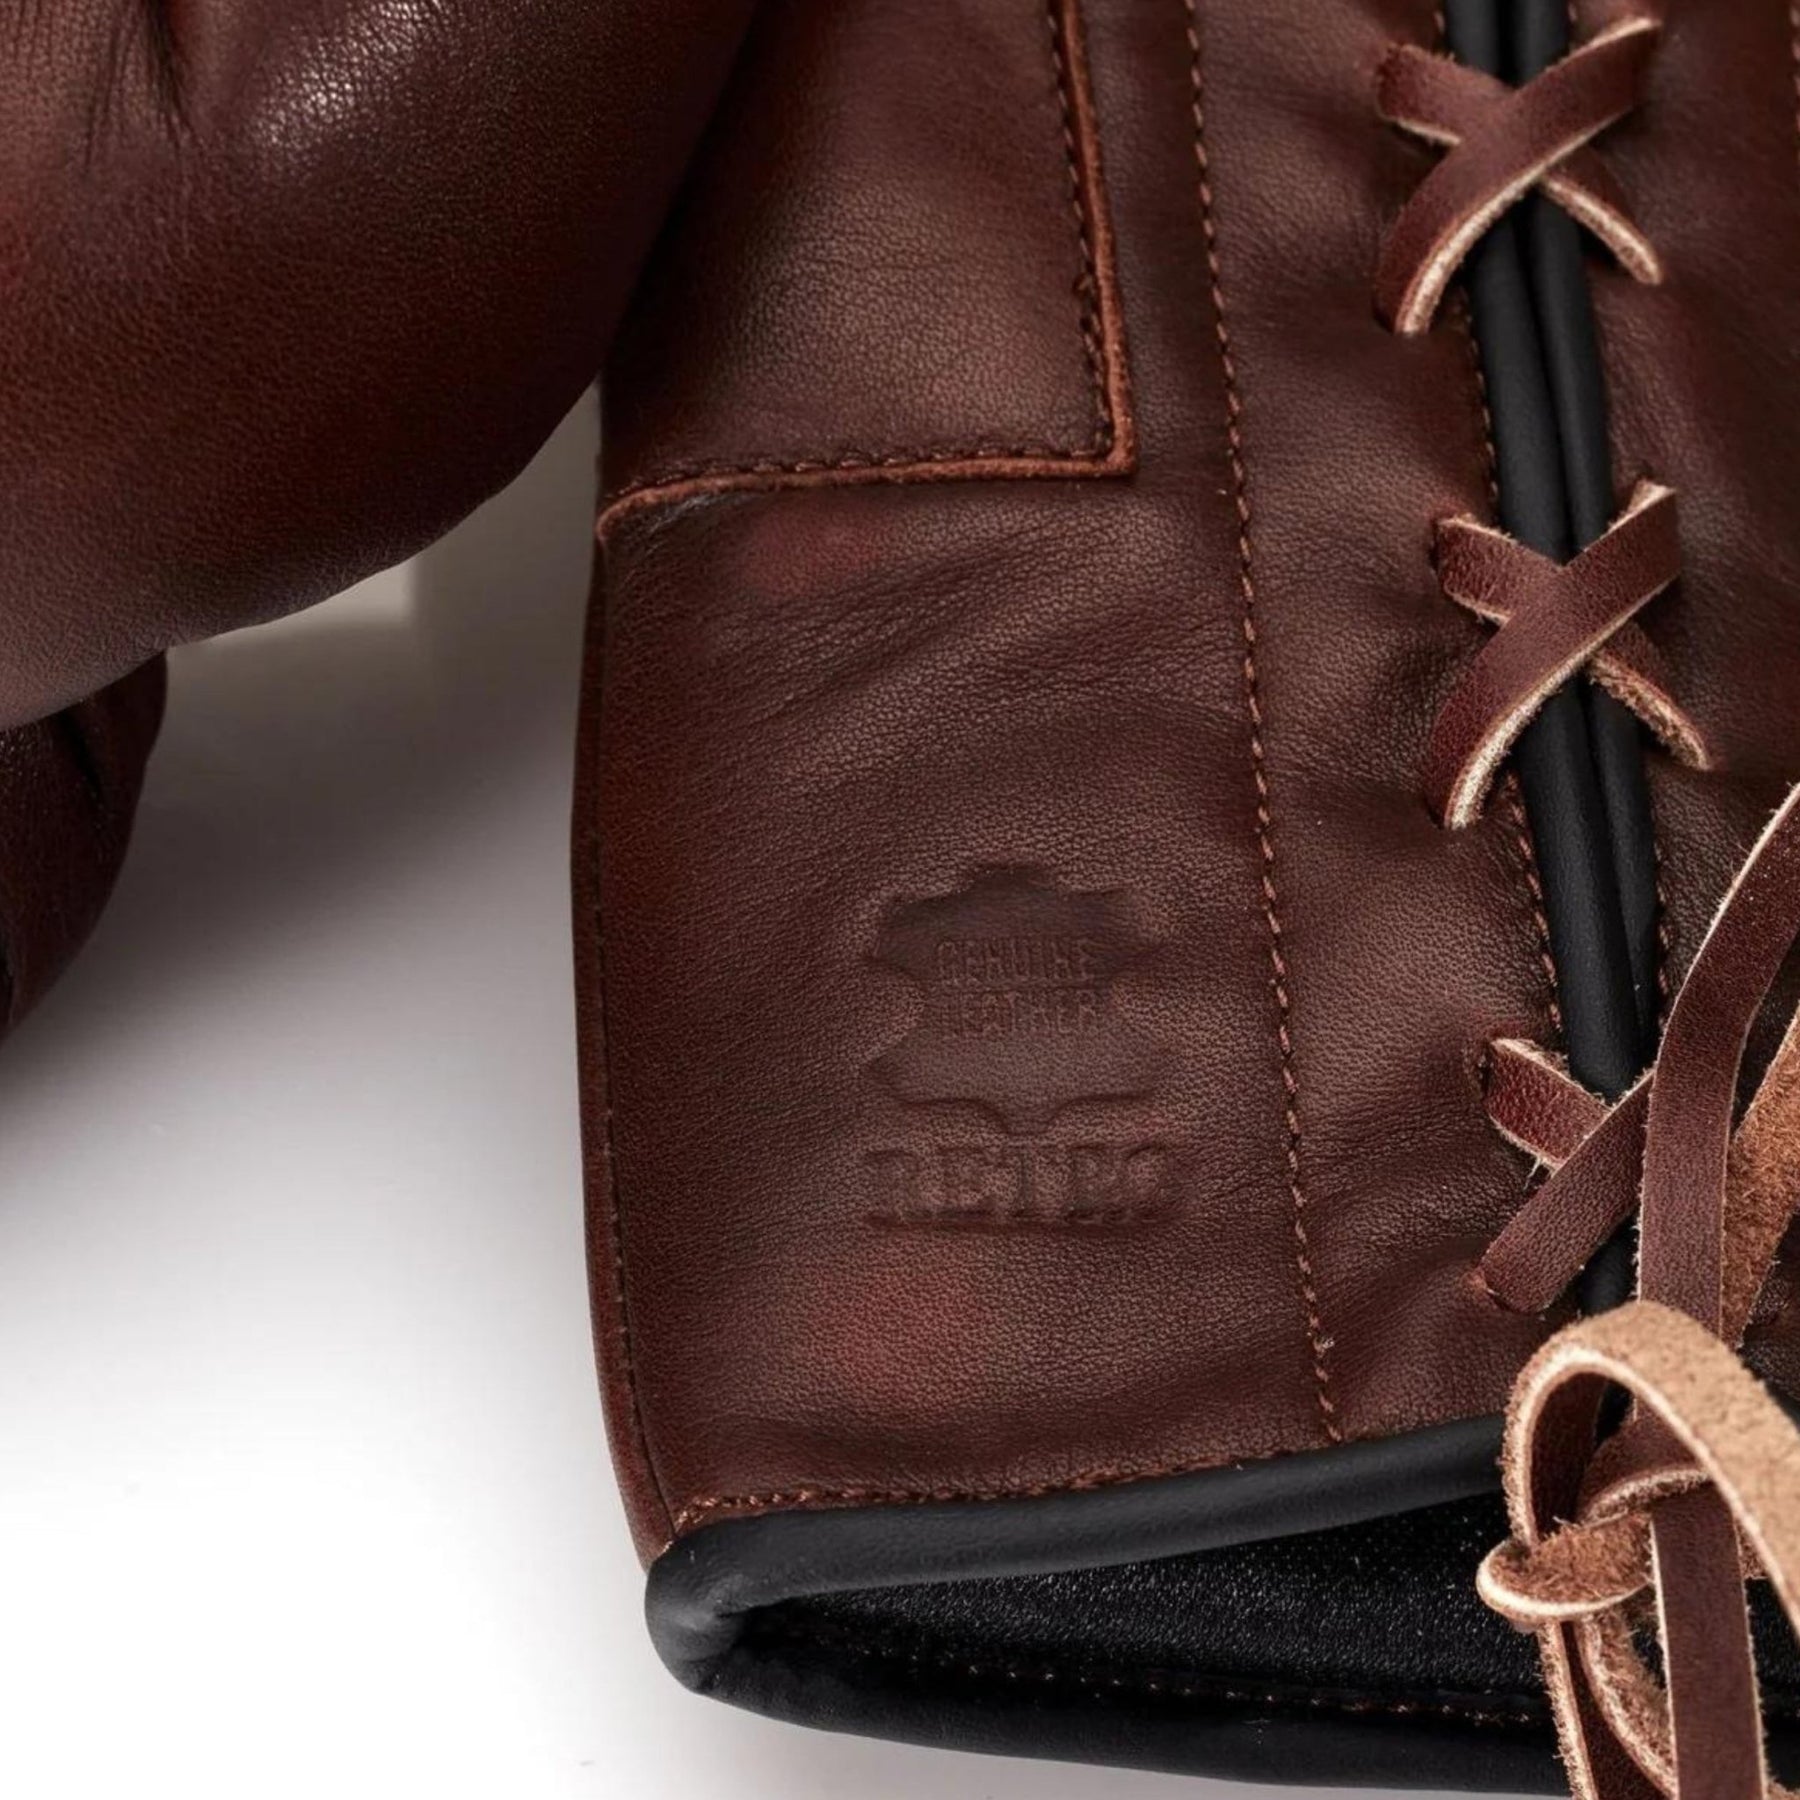 Designer Brown Leather Boxing Gloves Vintage Lace Up Style Handmade ...